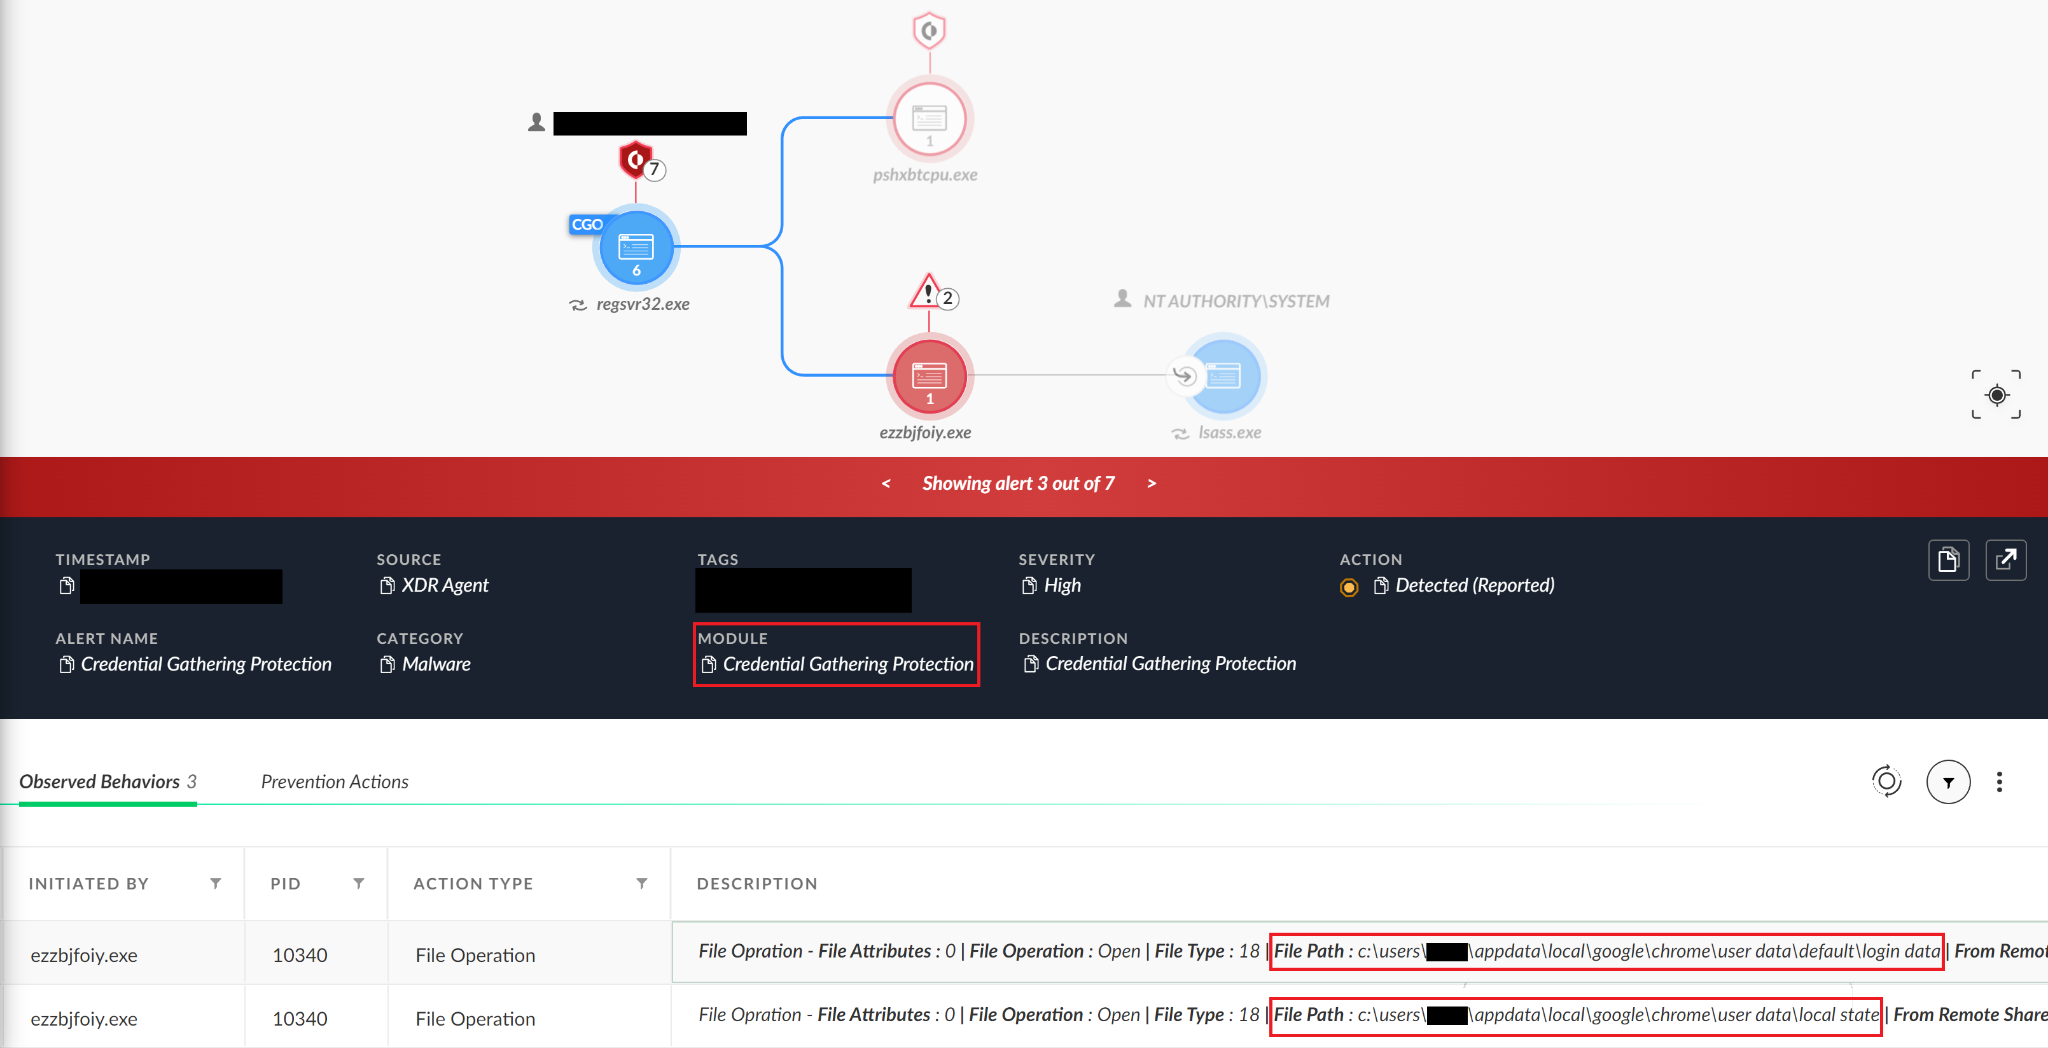 Red boxes highlight how the Credential Gathering Module identifies key file paths. 